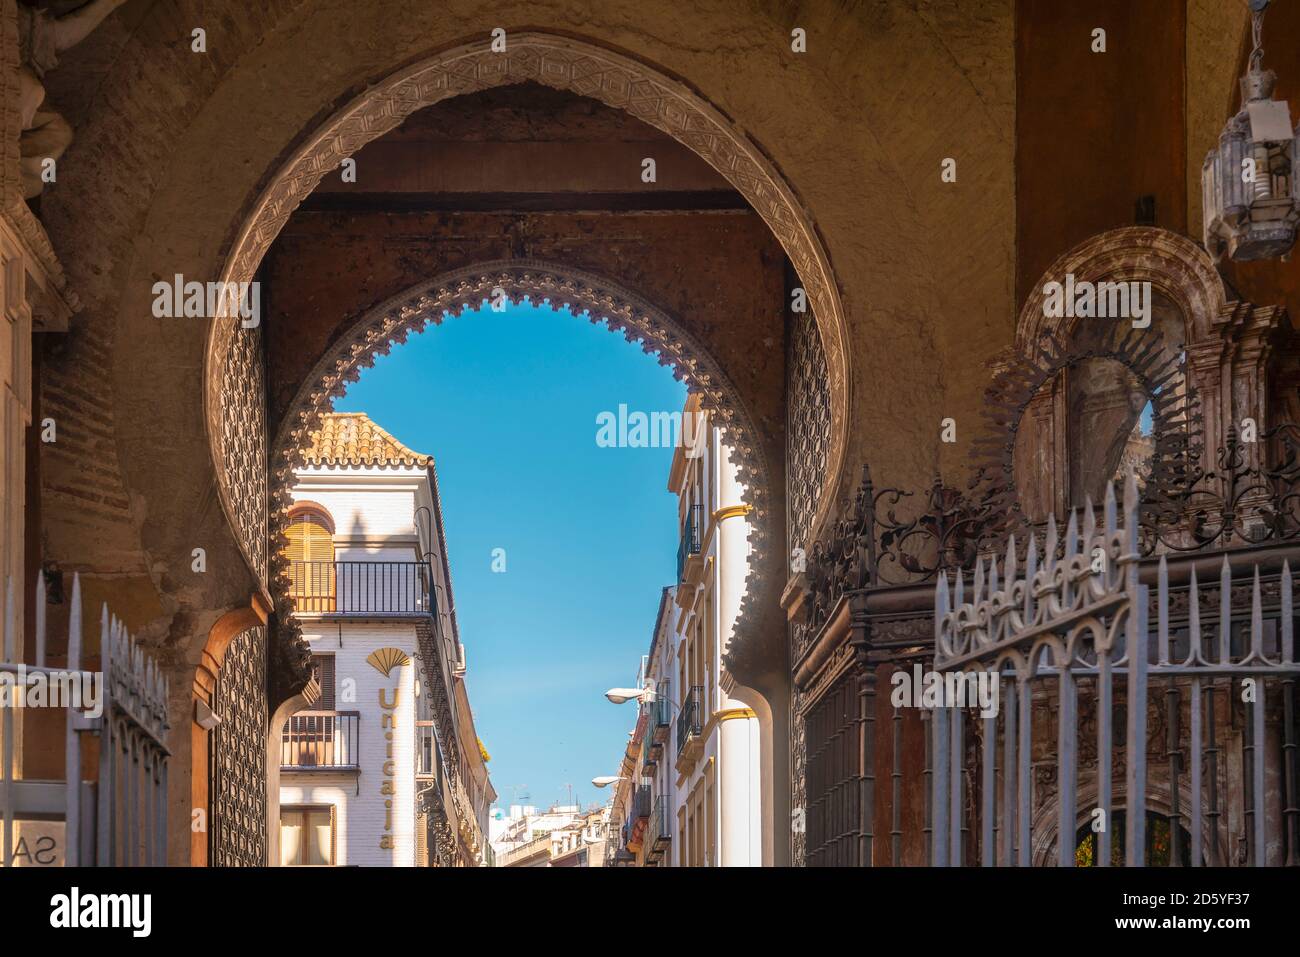 A historic moorish gate close to the Cathedral of Seville, Seville, Spain Stock Photo